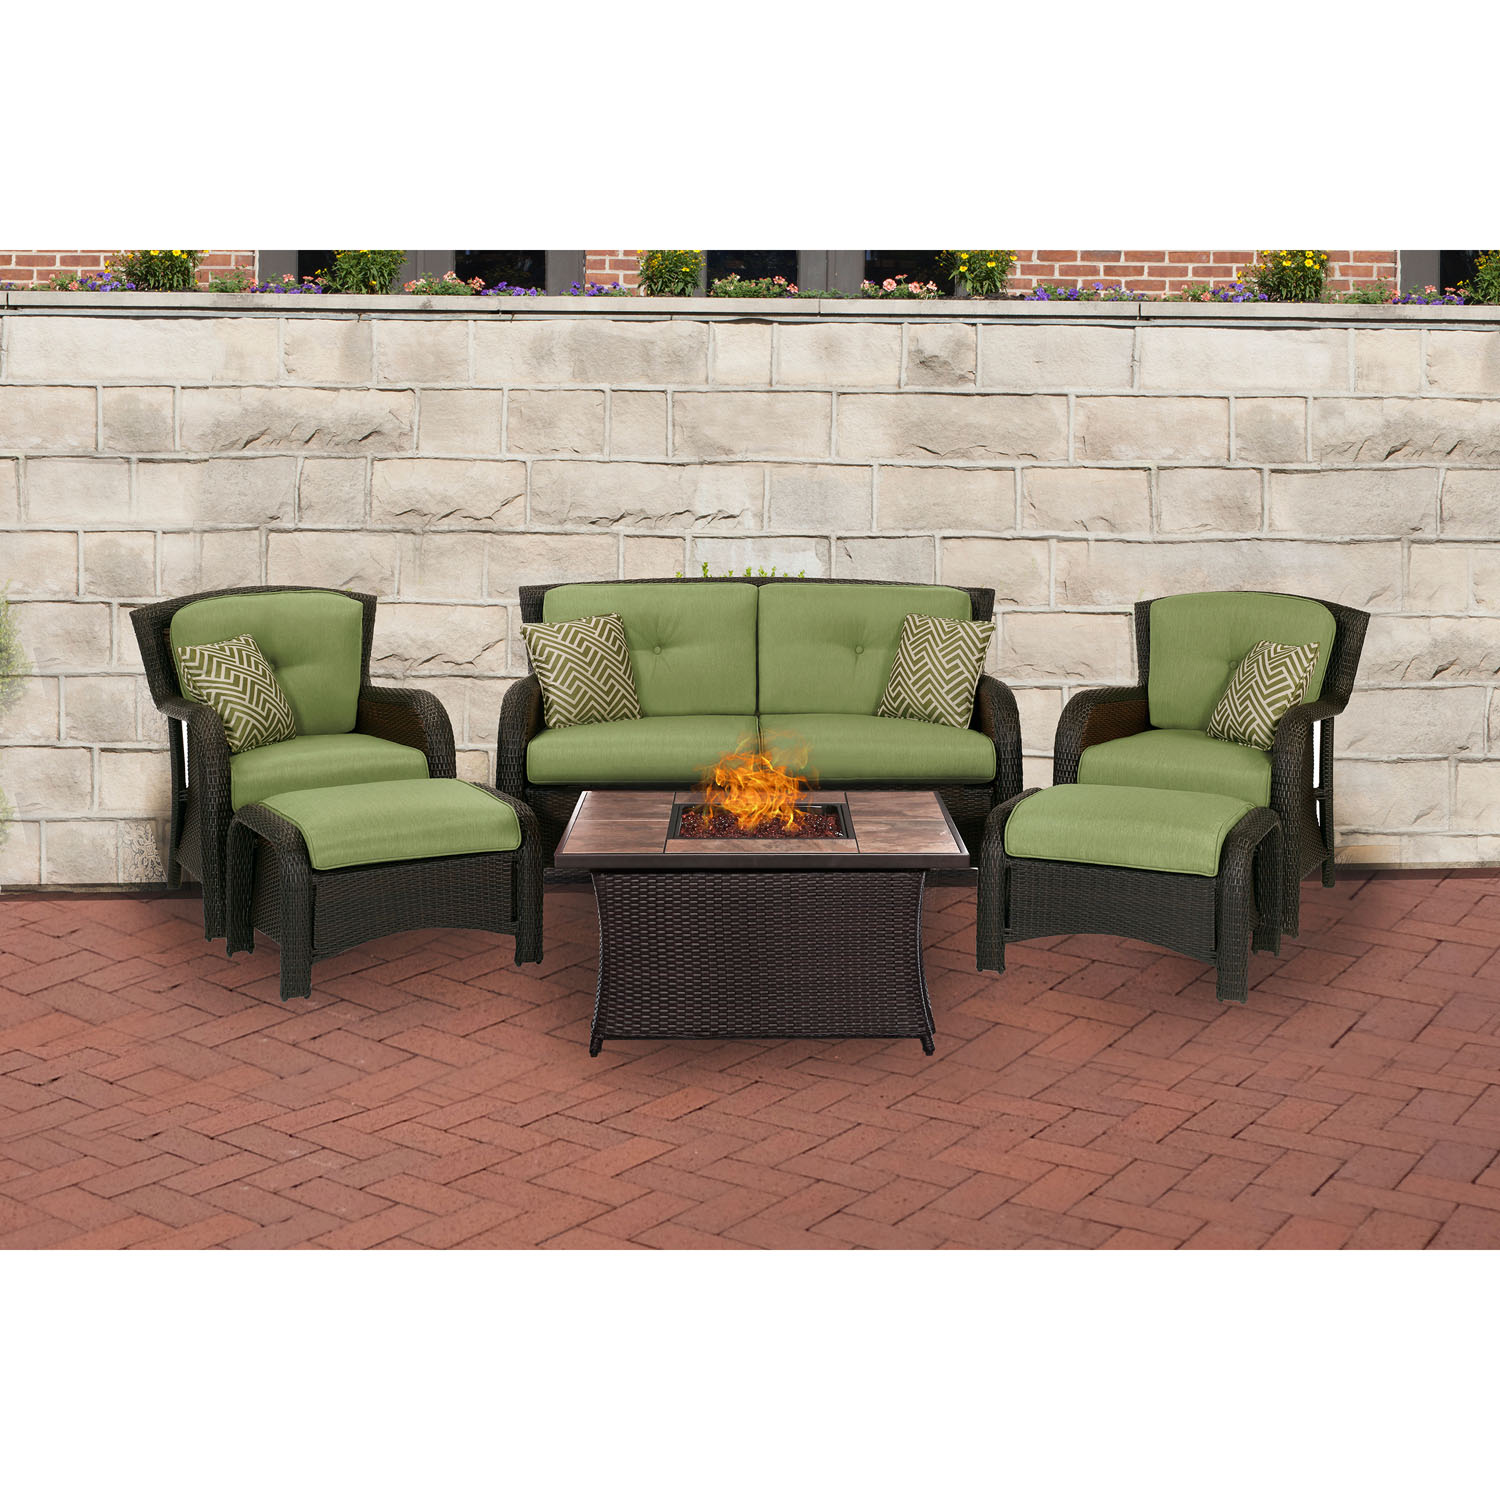 Hanover Strathmere 6 Pcs Wicker Fire Pit Chat Set, Cilantro Green - image 3 of 14